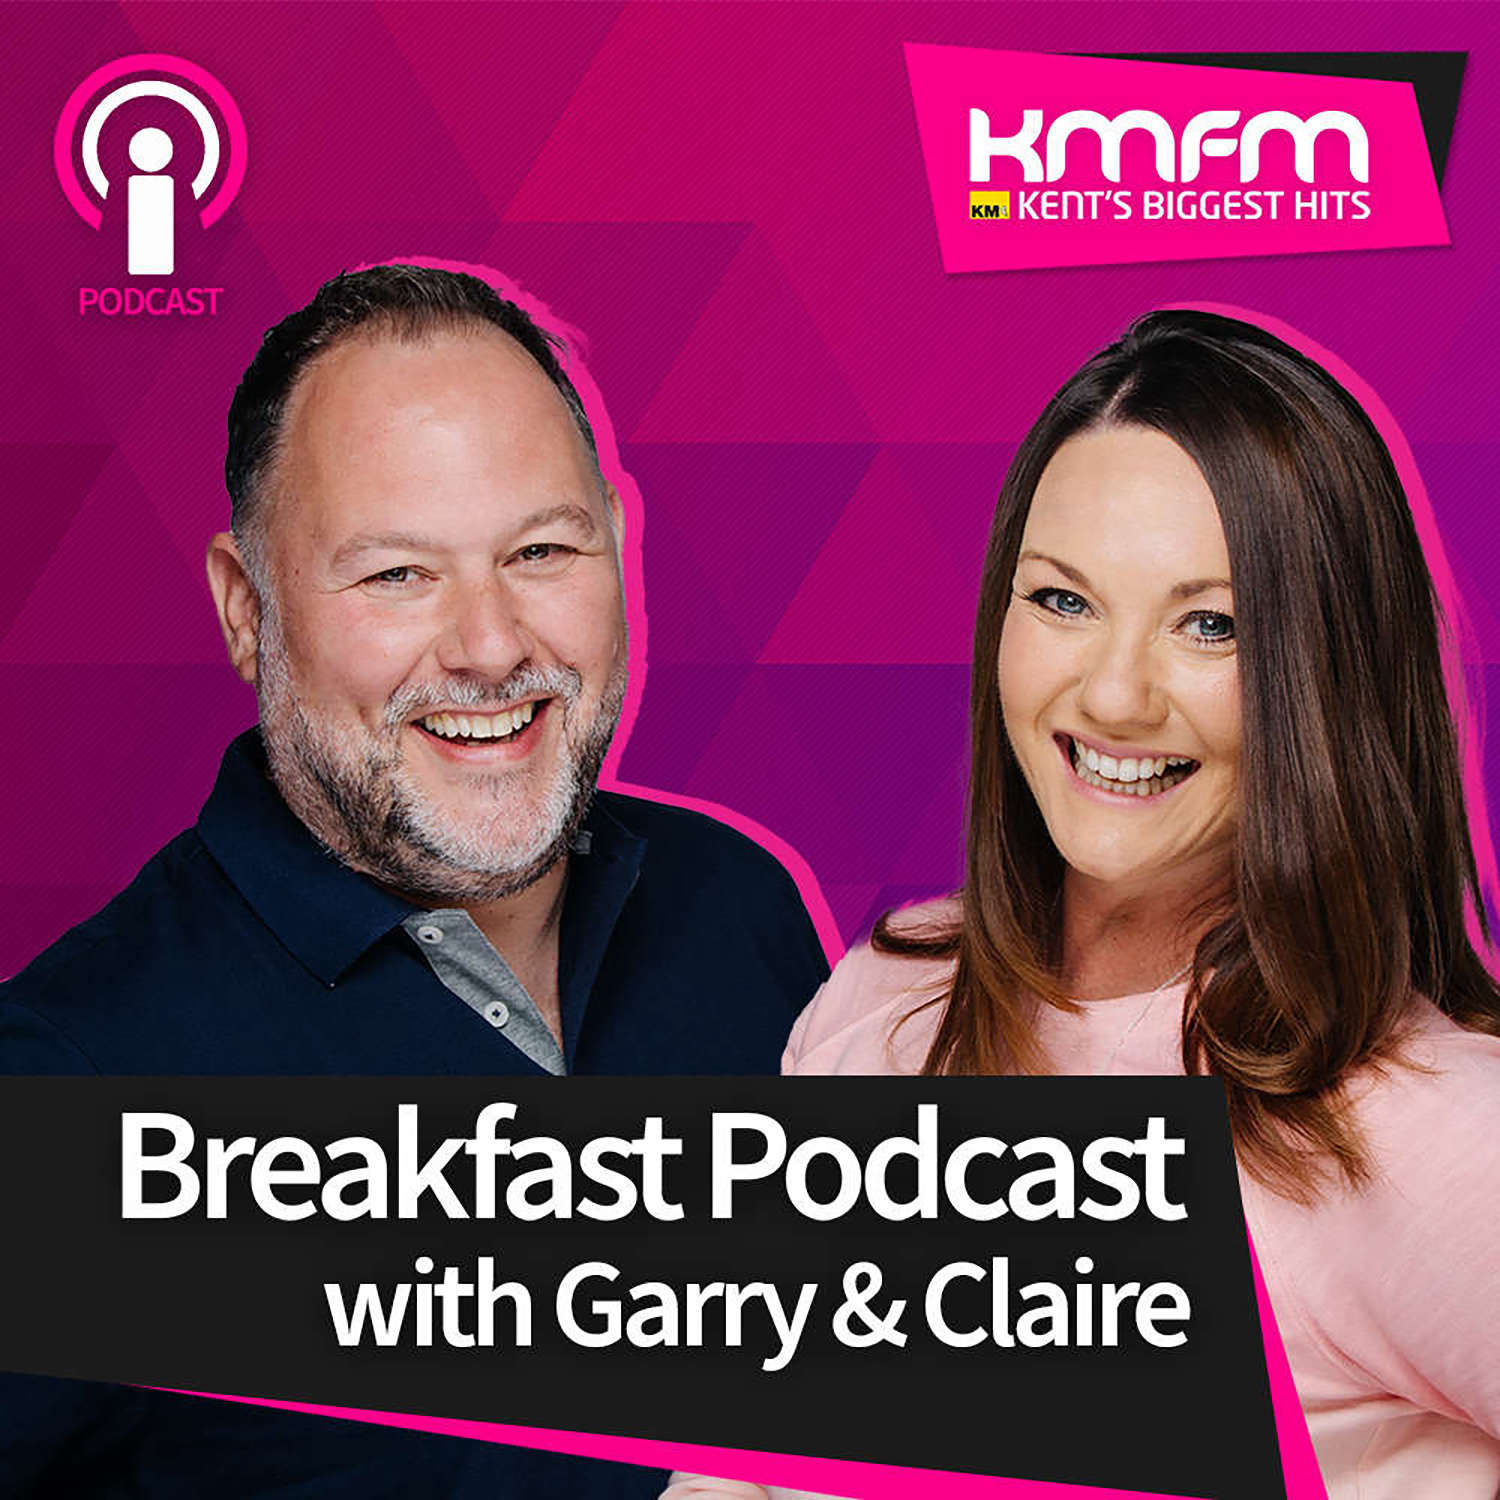 kmfm Breakfast Podcast with Garry and Claire